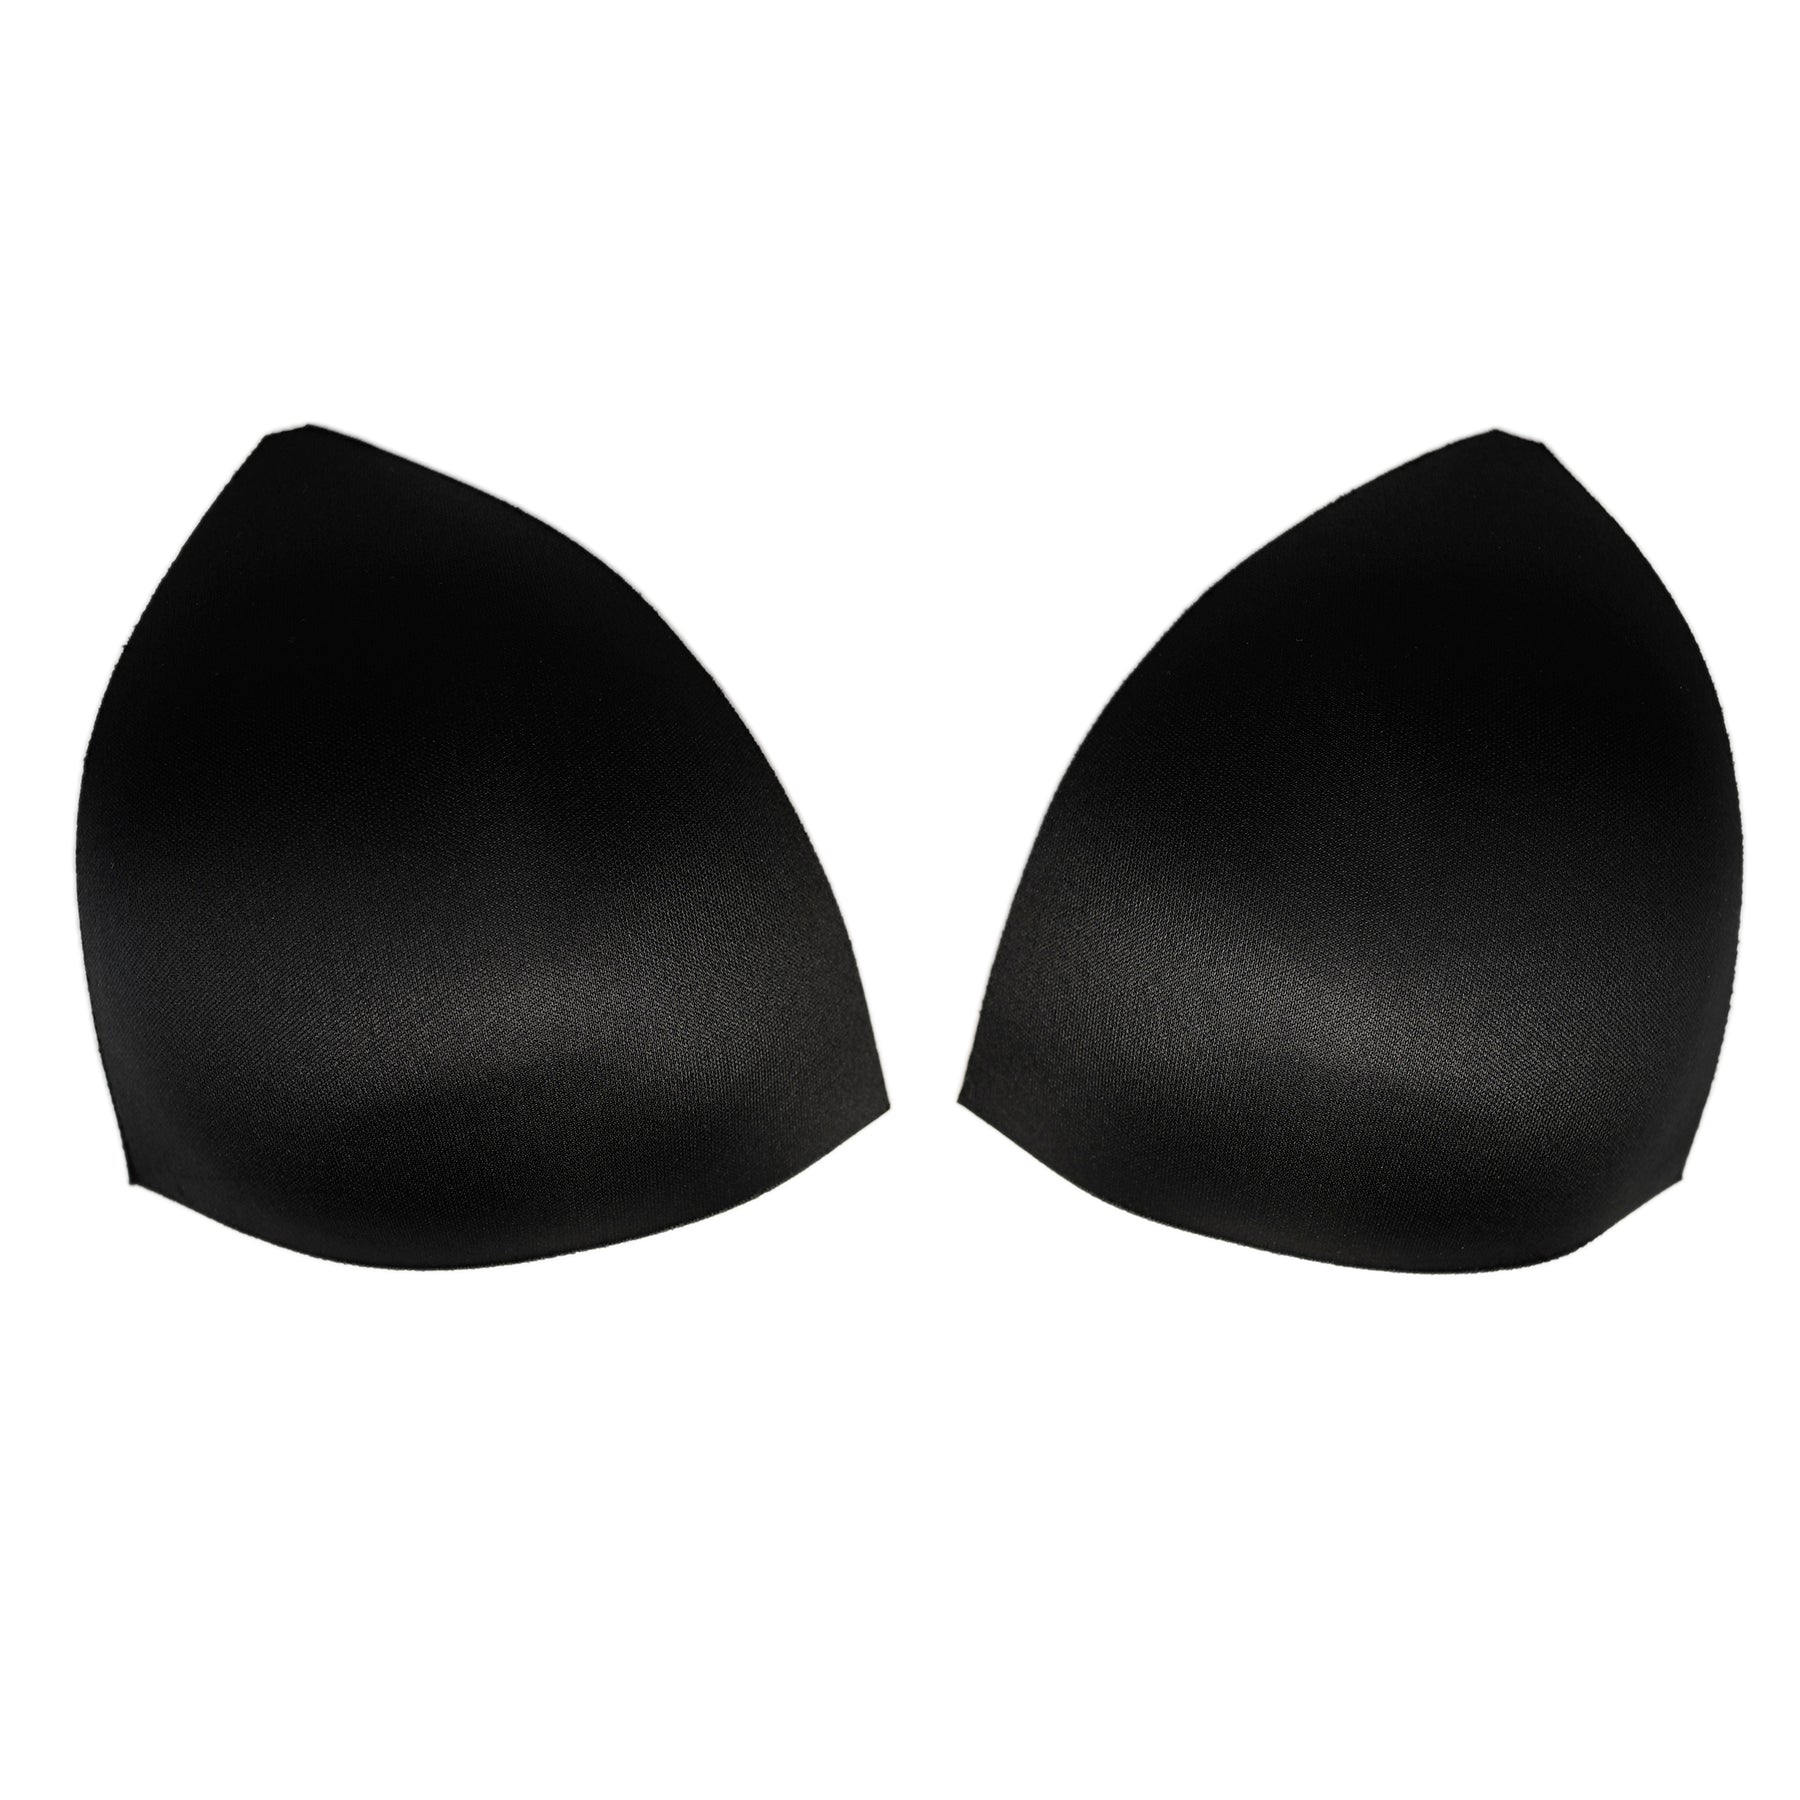 MC16 TRIANGLE BRA CUP WITH SIDE BOOST – Formline Engineered